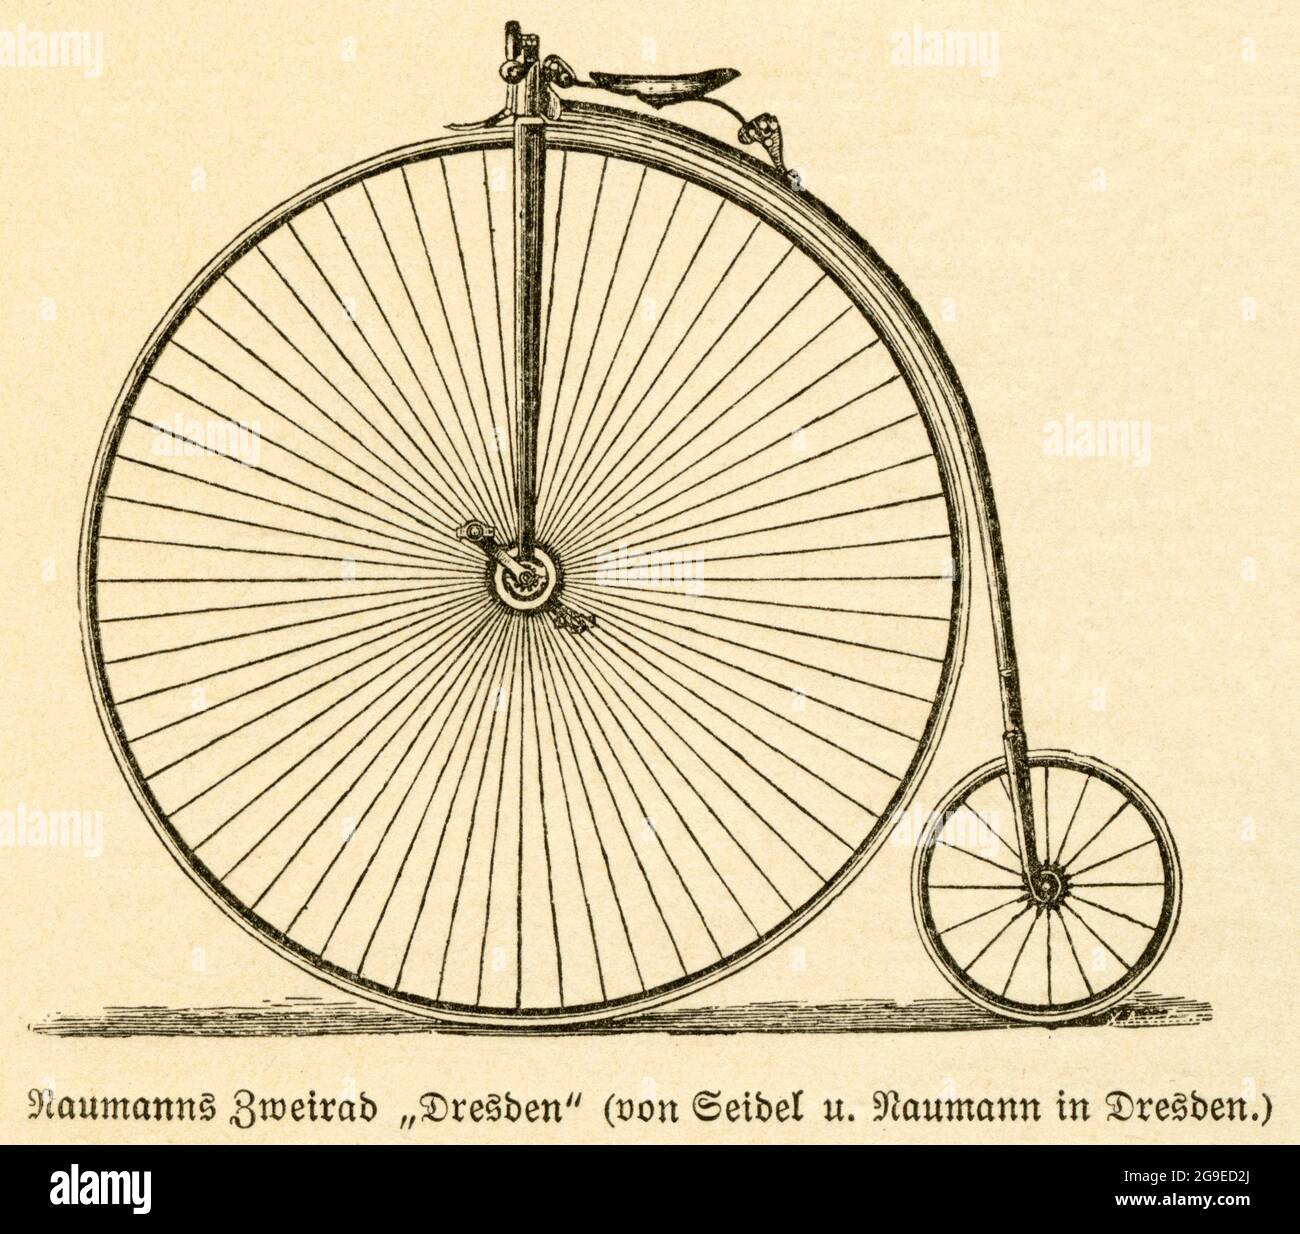 Germany, Saxony, Dresden, history of bicycles, high wheeler, ADDITIONAL-RIGHTS-CLEARANCE-INFO-NOT-AVAILABLE Stock Photo